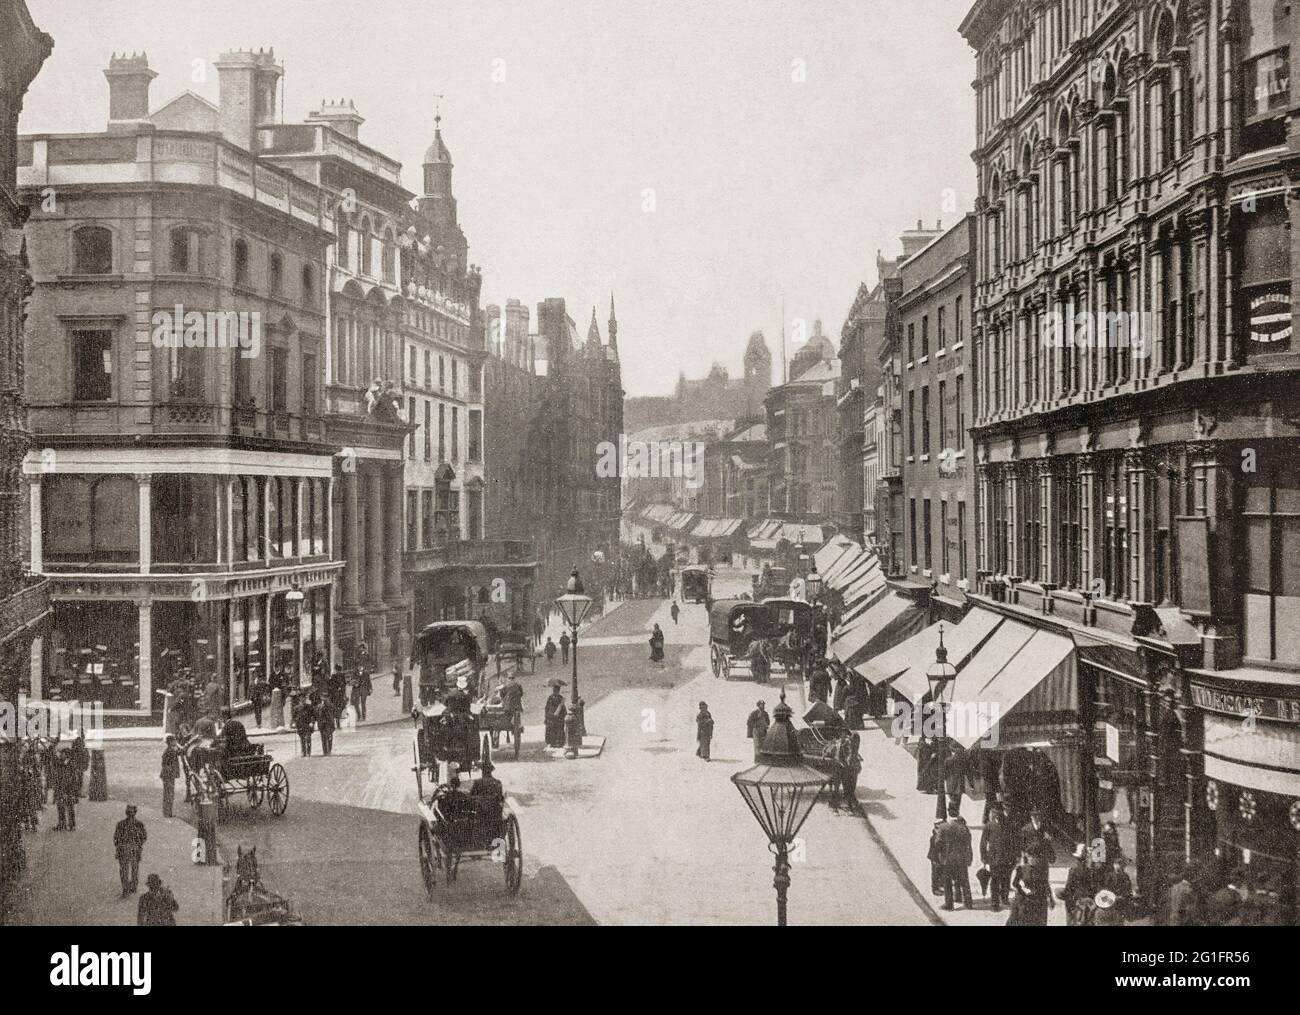 A late 19th century view of New Street in central Birmingham, England. It is one of the city's principal thoroughfares and shopping streets linking Victoria Square to the Bullring. It gives its name to New Street railway station, although the station never had direct access to New Street except via  Stephenson Street. Stock Photo